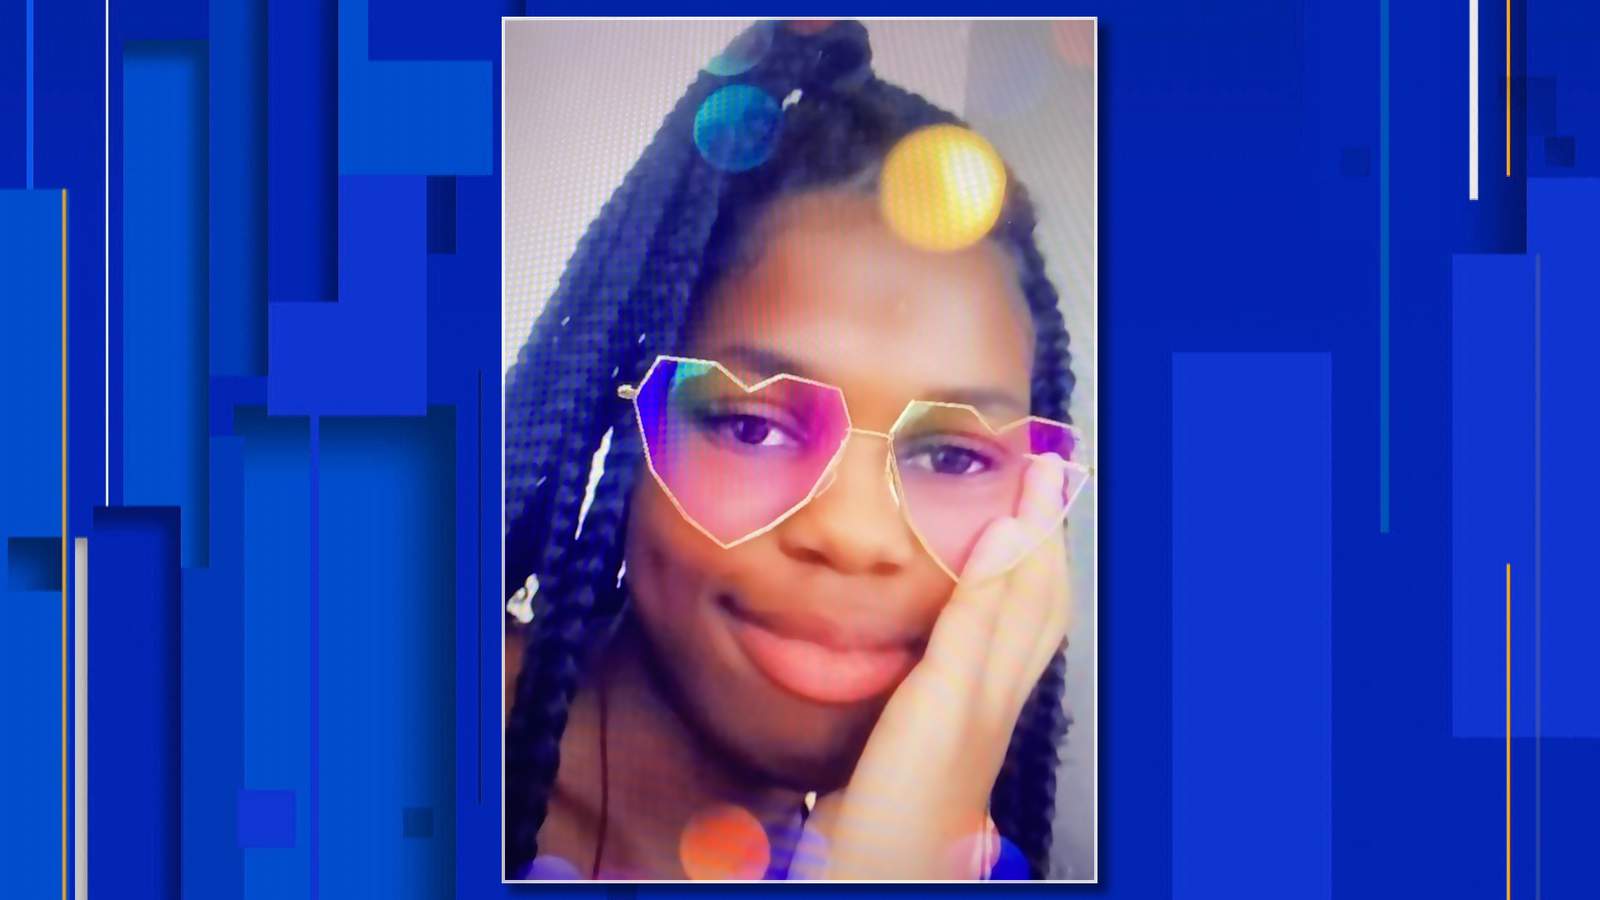 Detroit police: 18-year-old with autism has been found